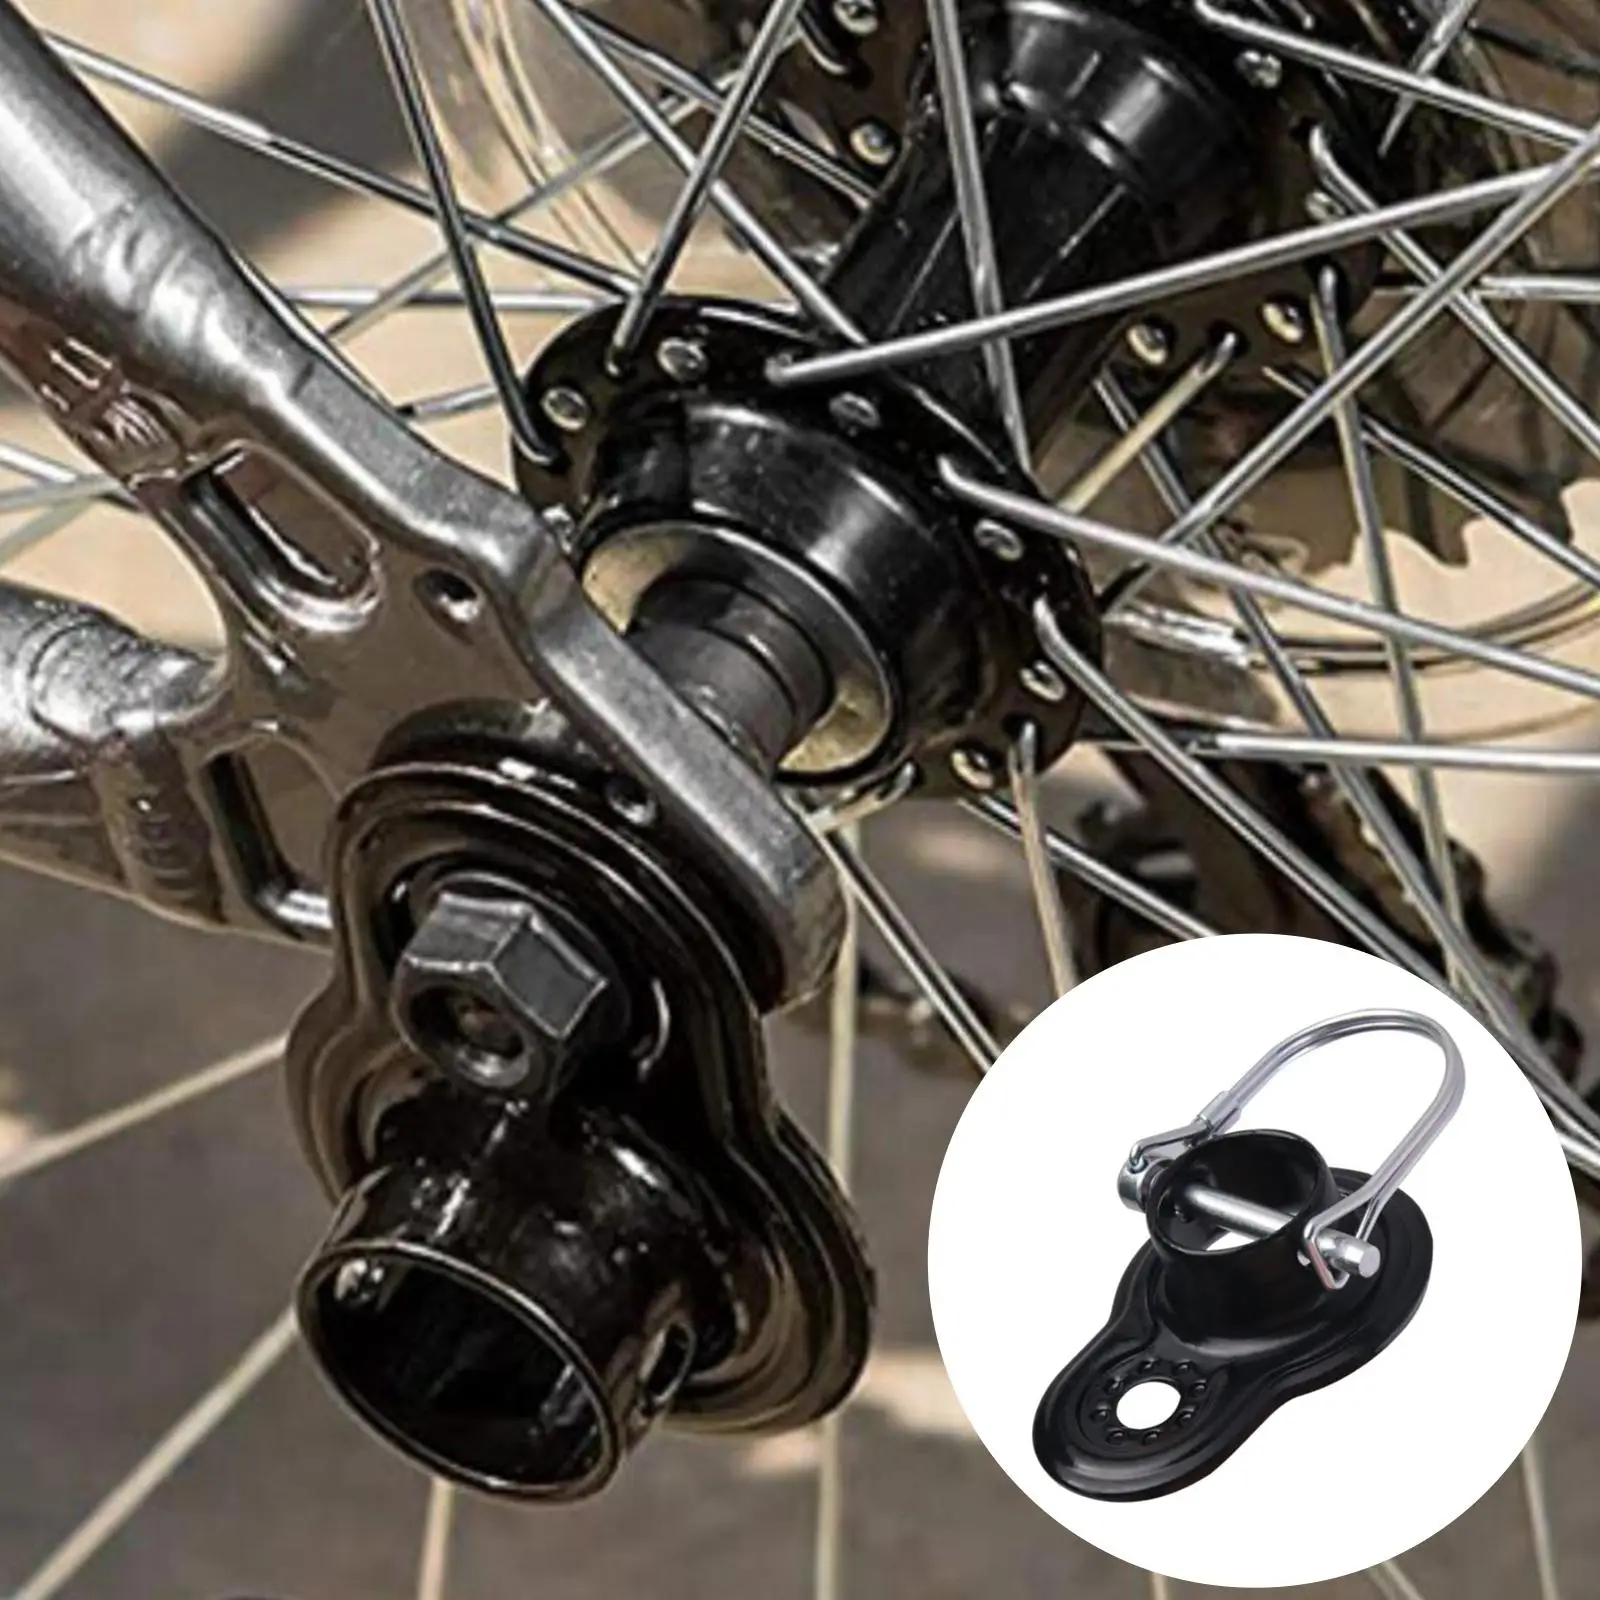 Universal Bike Trailer Coupler Hitch Attachment Flat and Angled Couplers